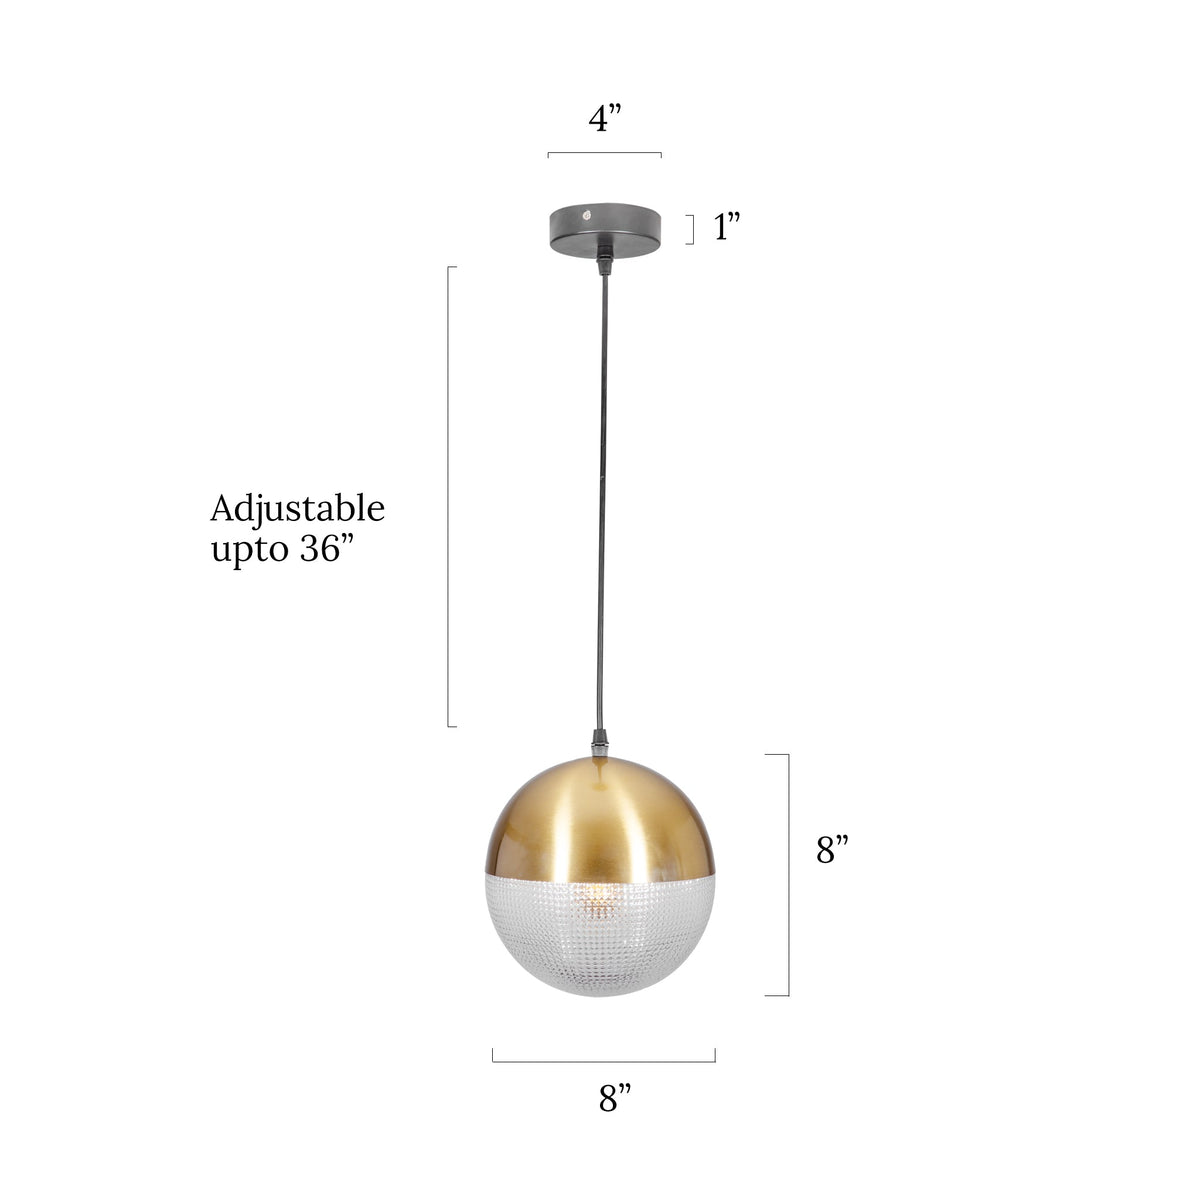 Shop Have a Ball Pendant Light store near you